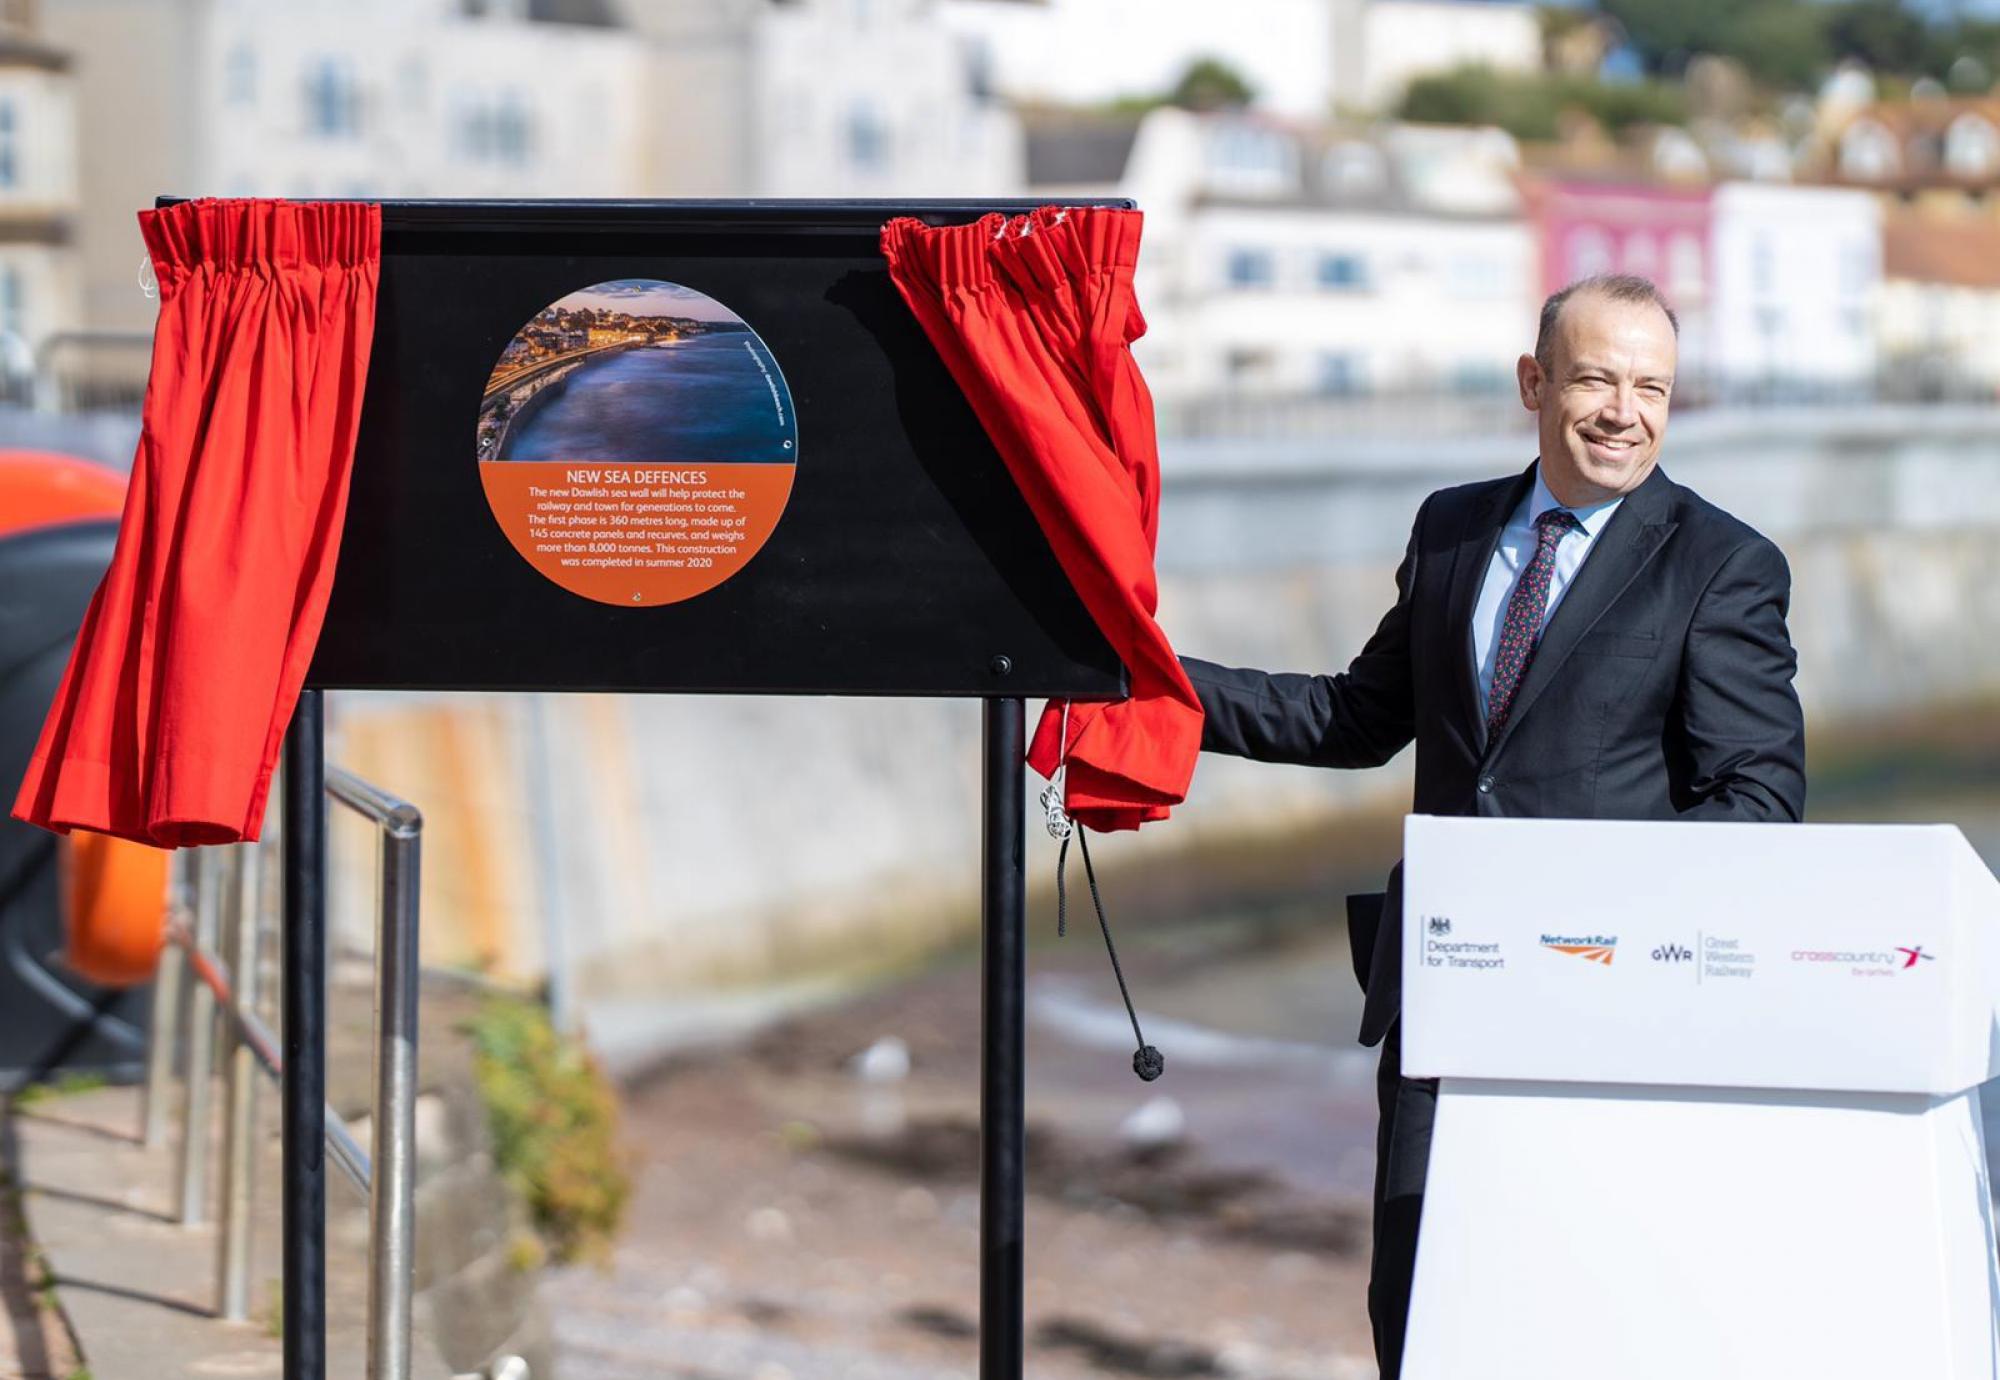 Rail Minister opens first phase of Dawlish seawall 